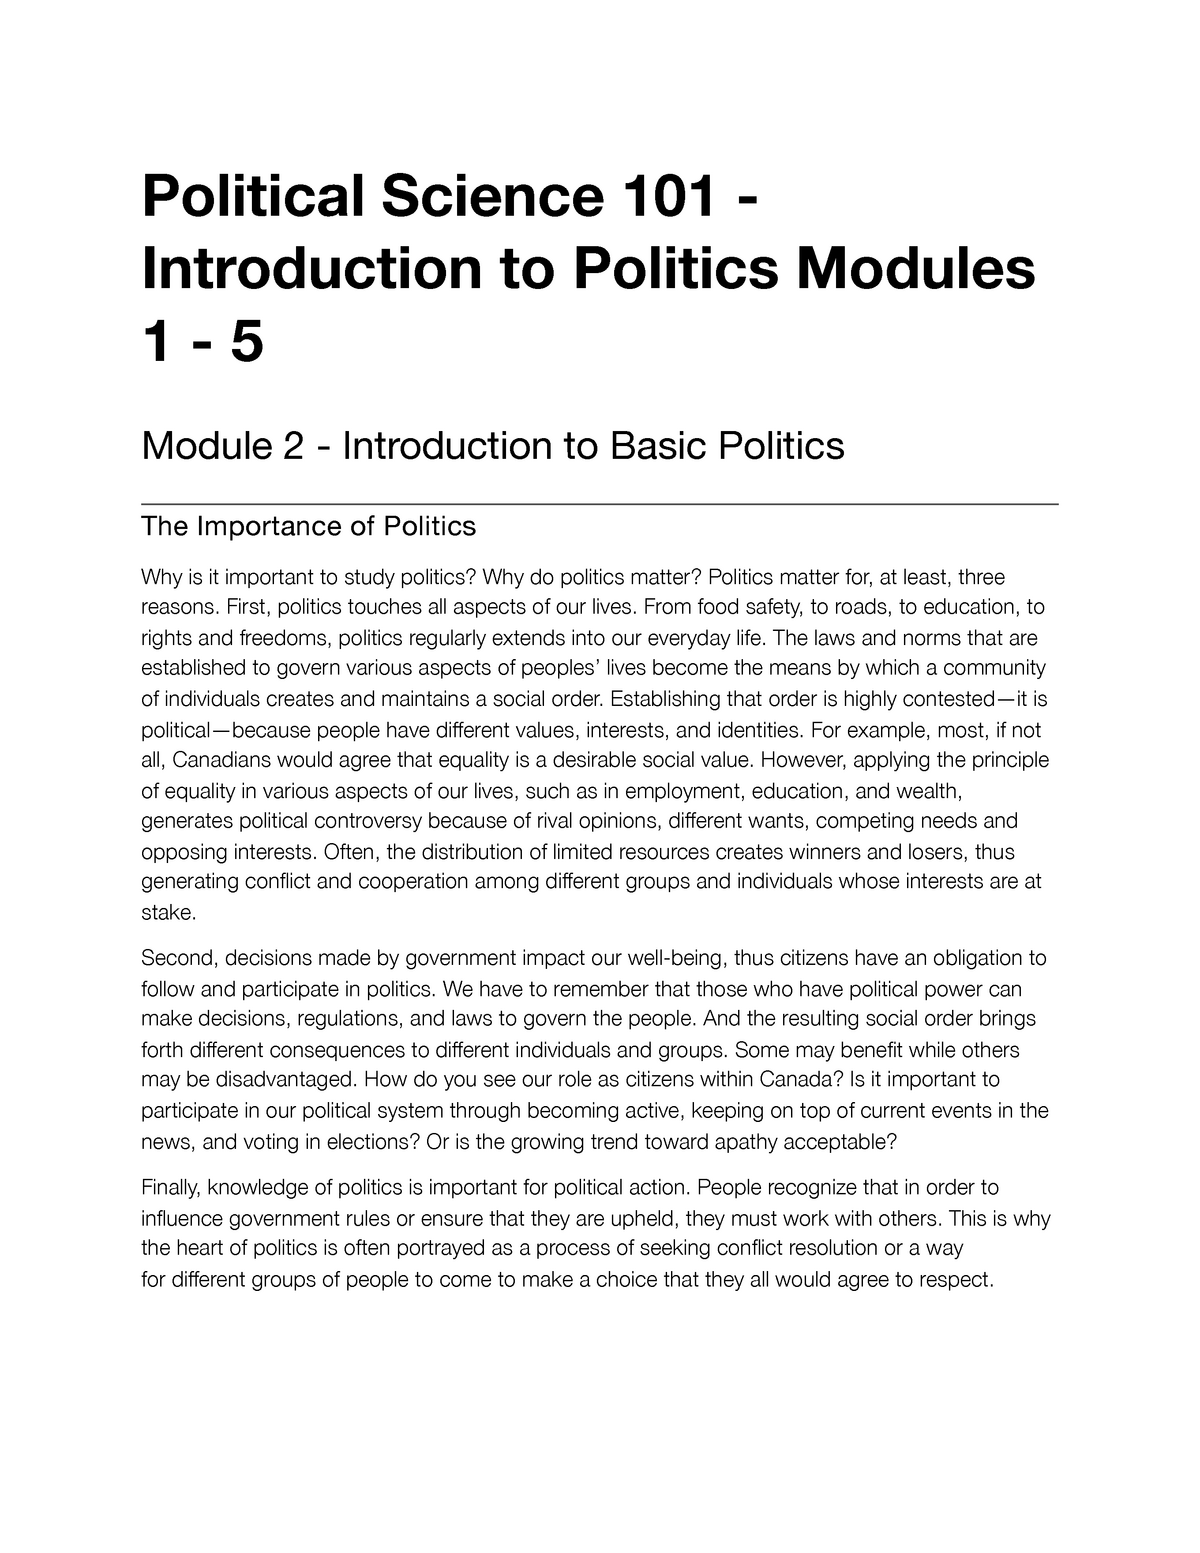 political science assignment topics for college students